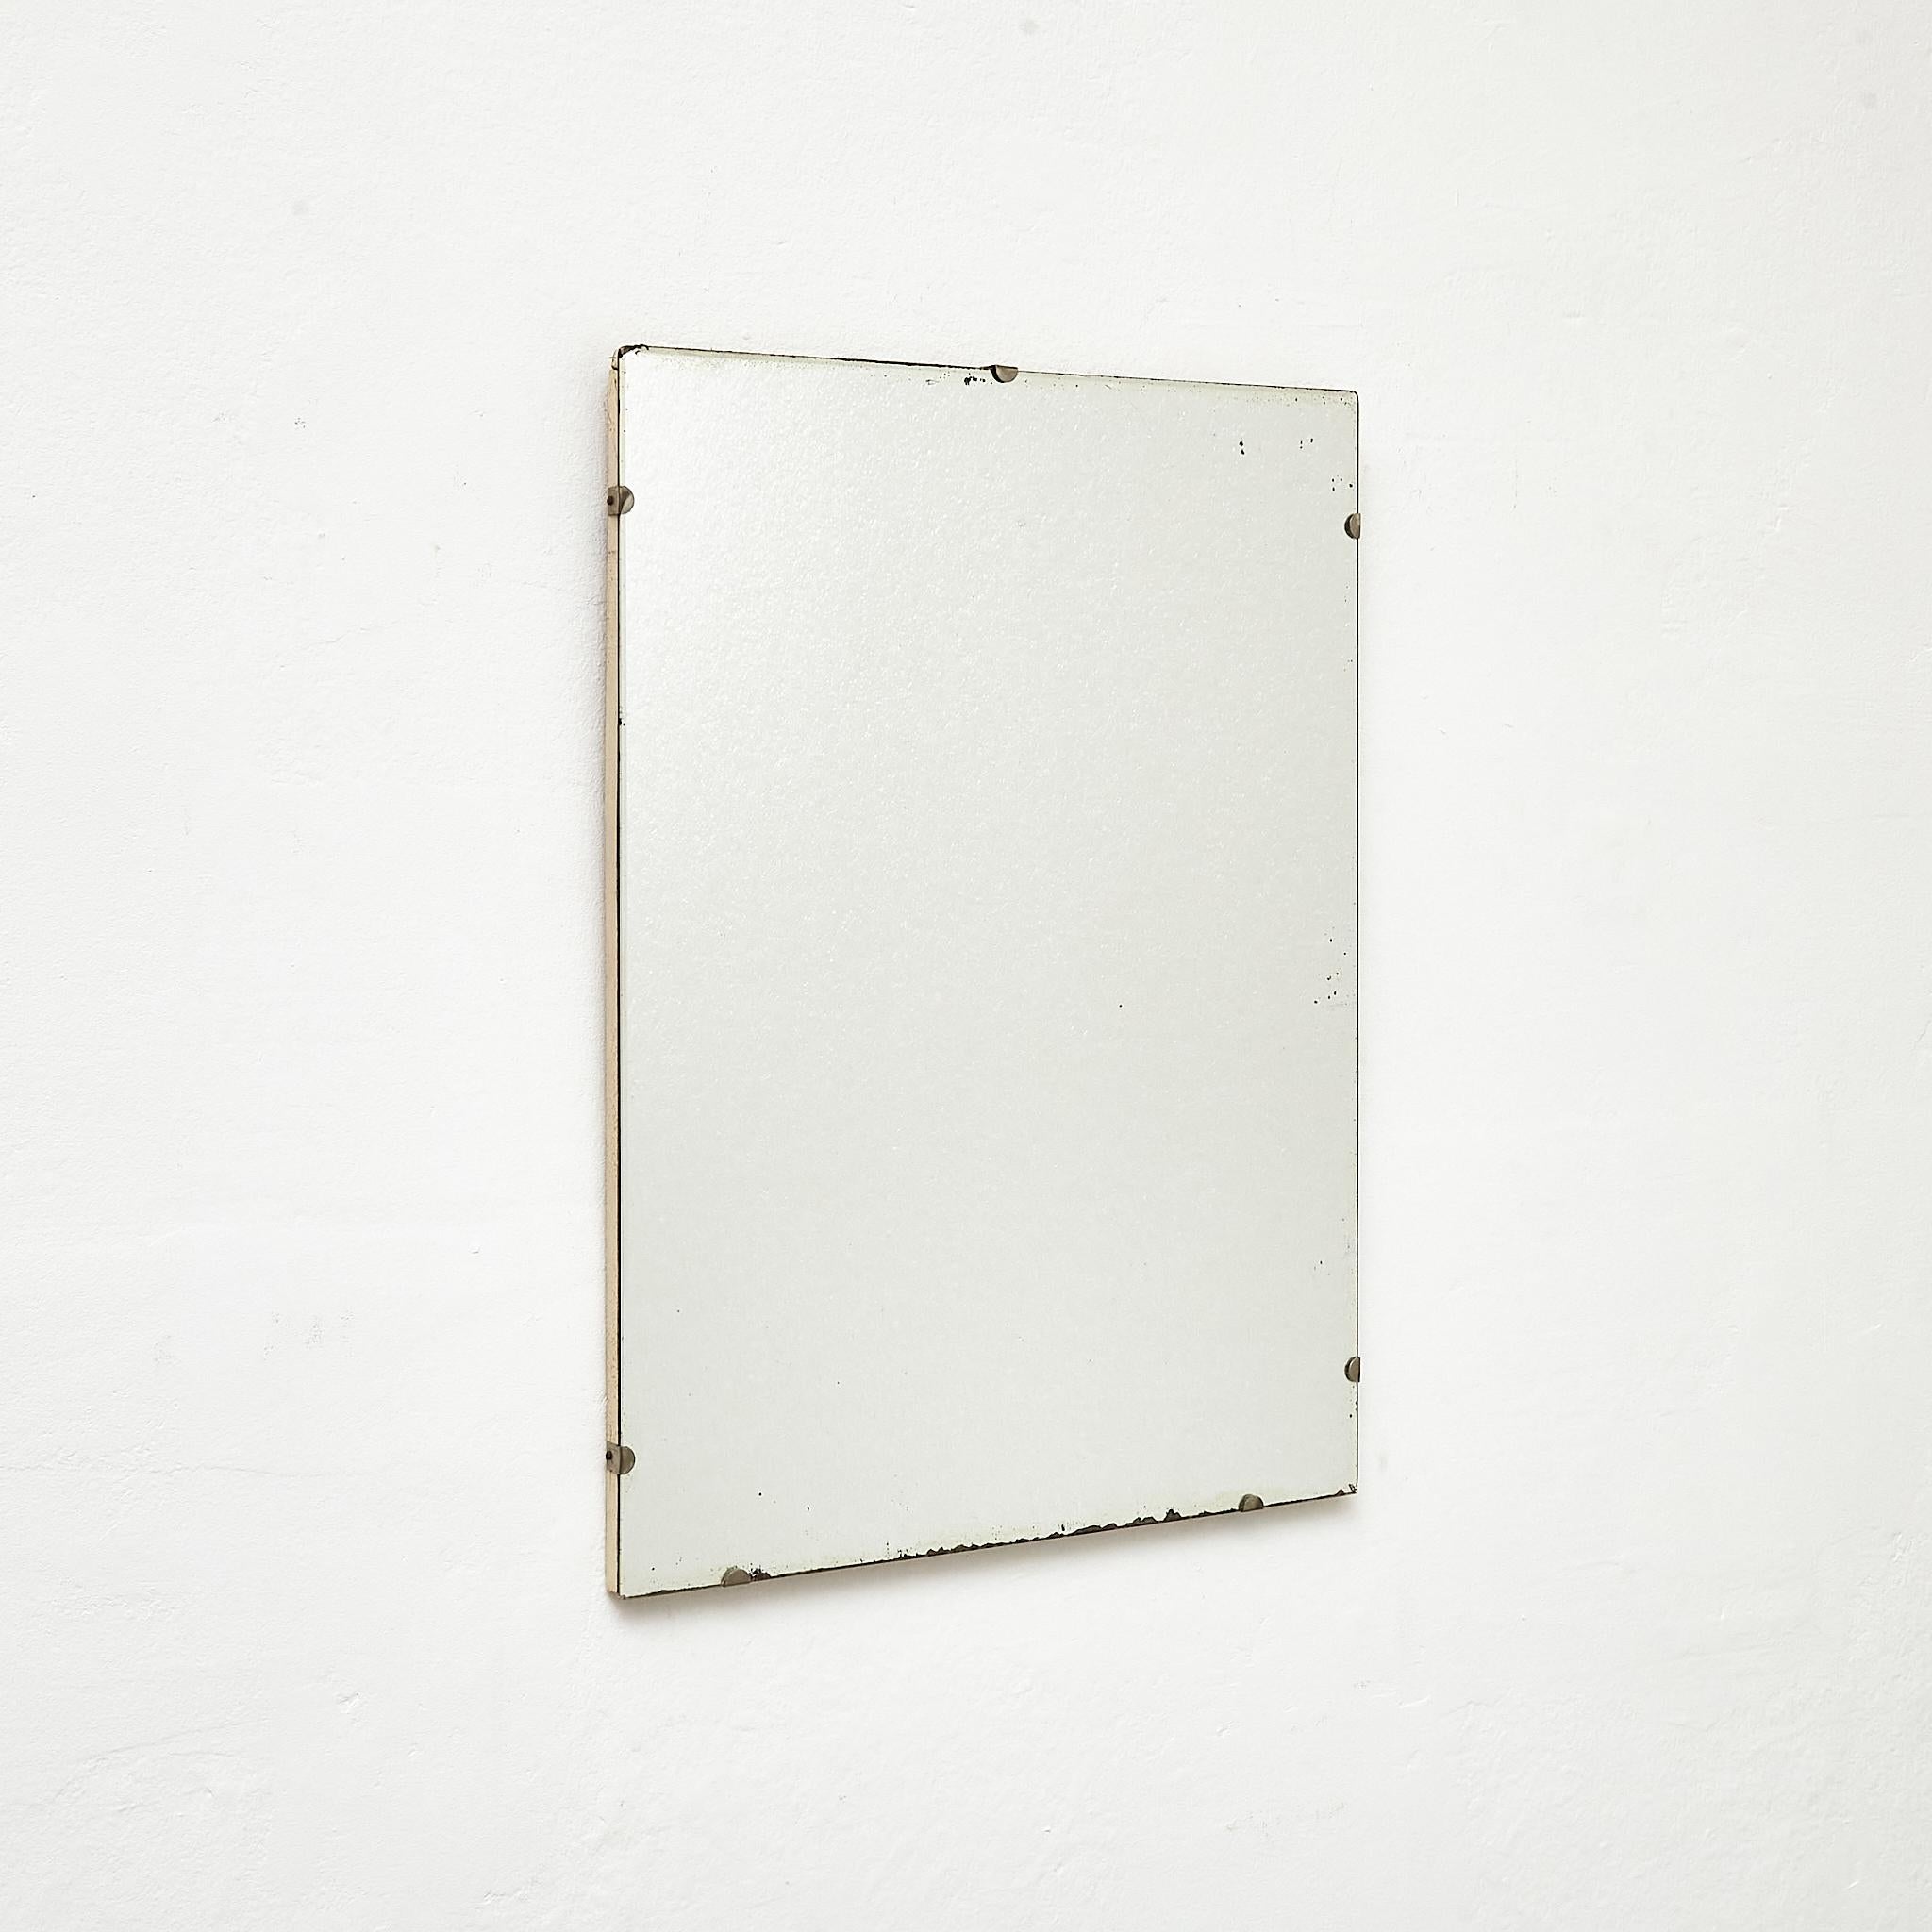 Antique Early 20th century French Wall Mirror.

Manufactured France, circa 1940.

Materials:
Wood, mirror

Dimensions: 
D 2 x W 45 cm x H 60 cm

In original condition, with minor wear consistent with age and use, preserving a beautiful